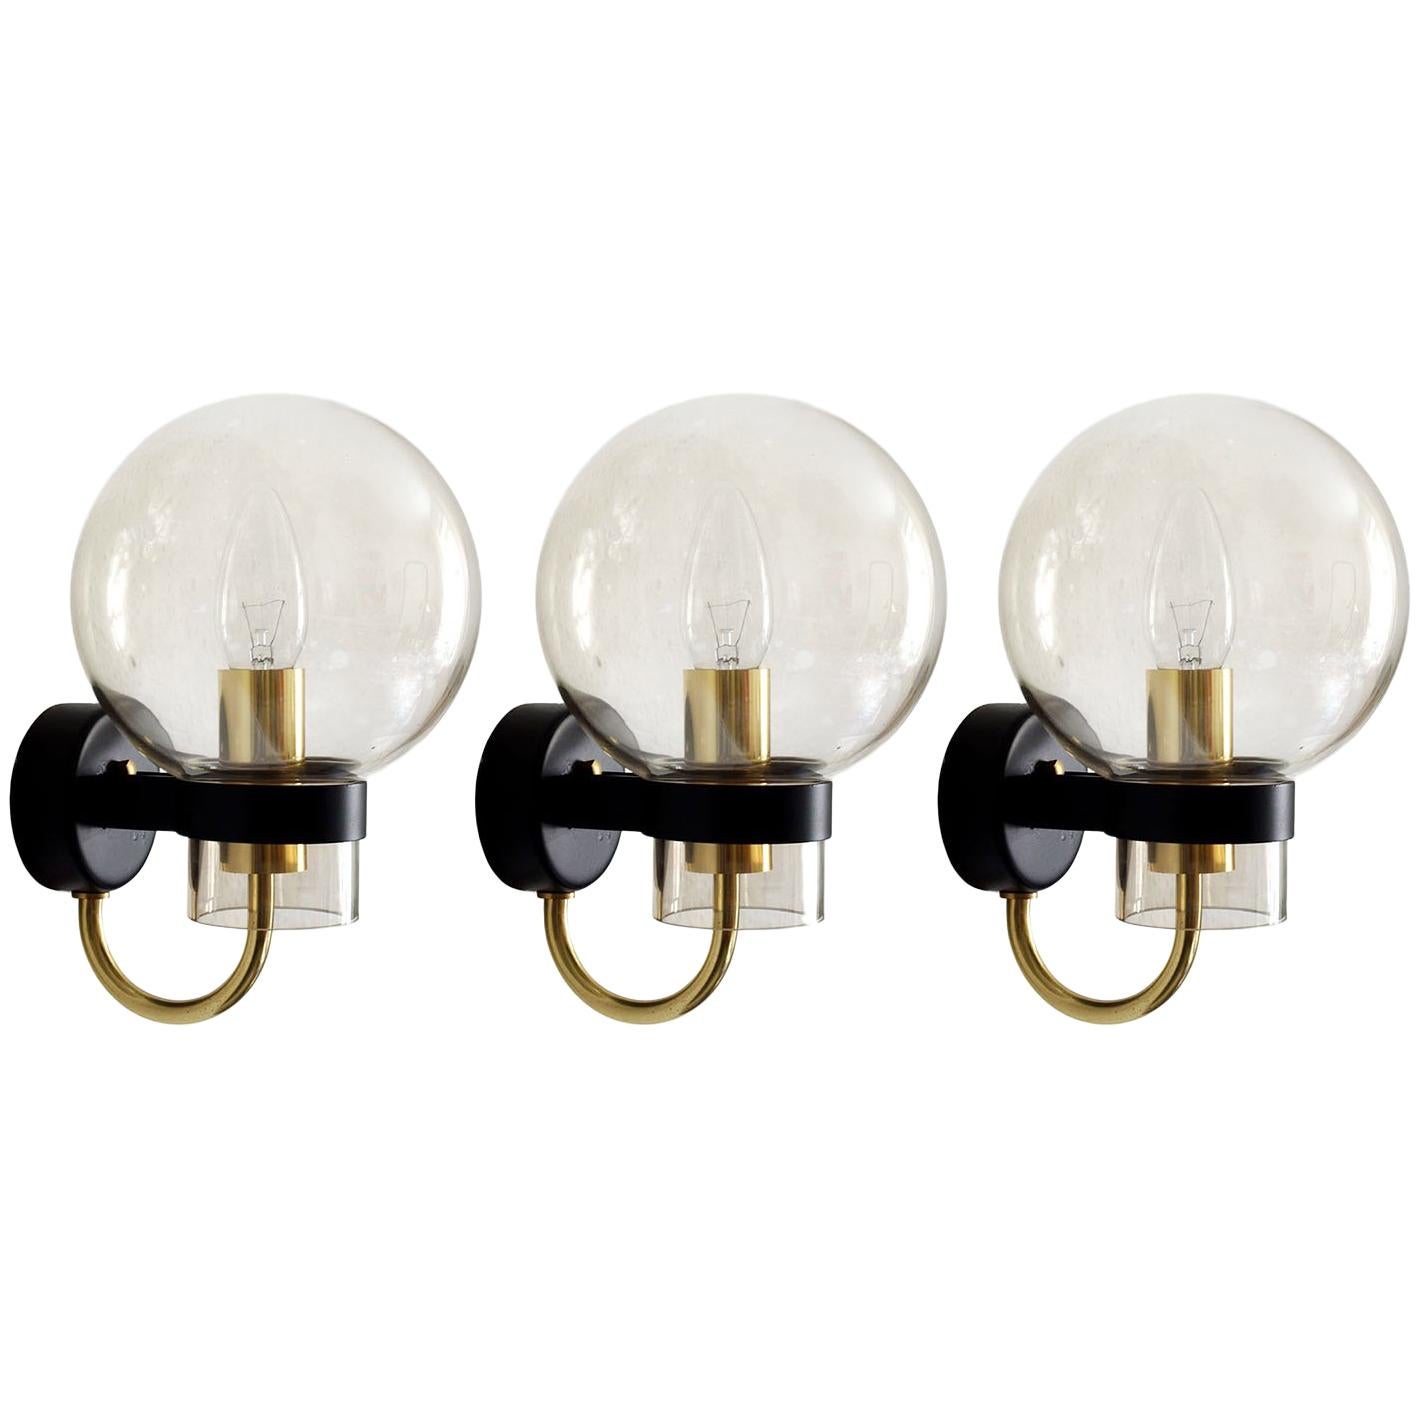 Set of Three Rare Modernist Glass Globes Sconces Wall Lamps, Germany 1960s